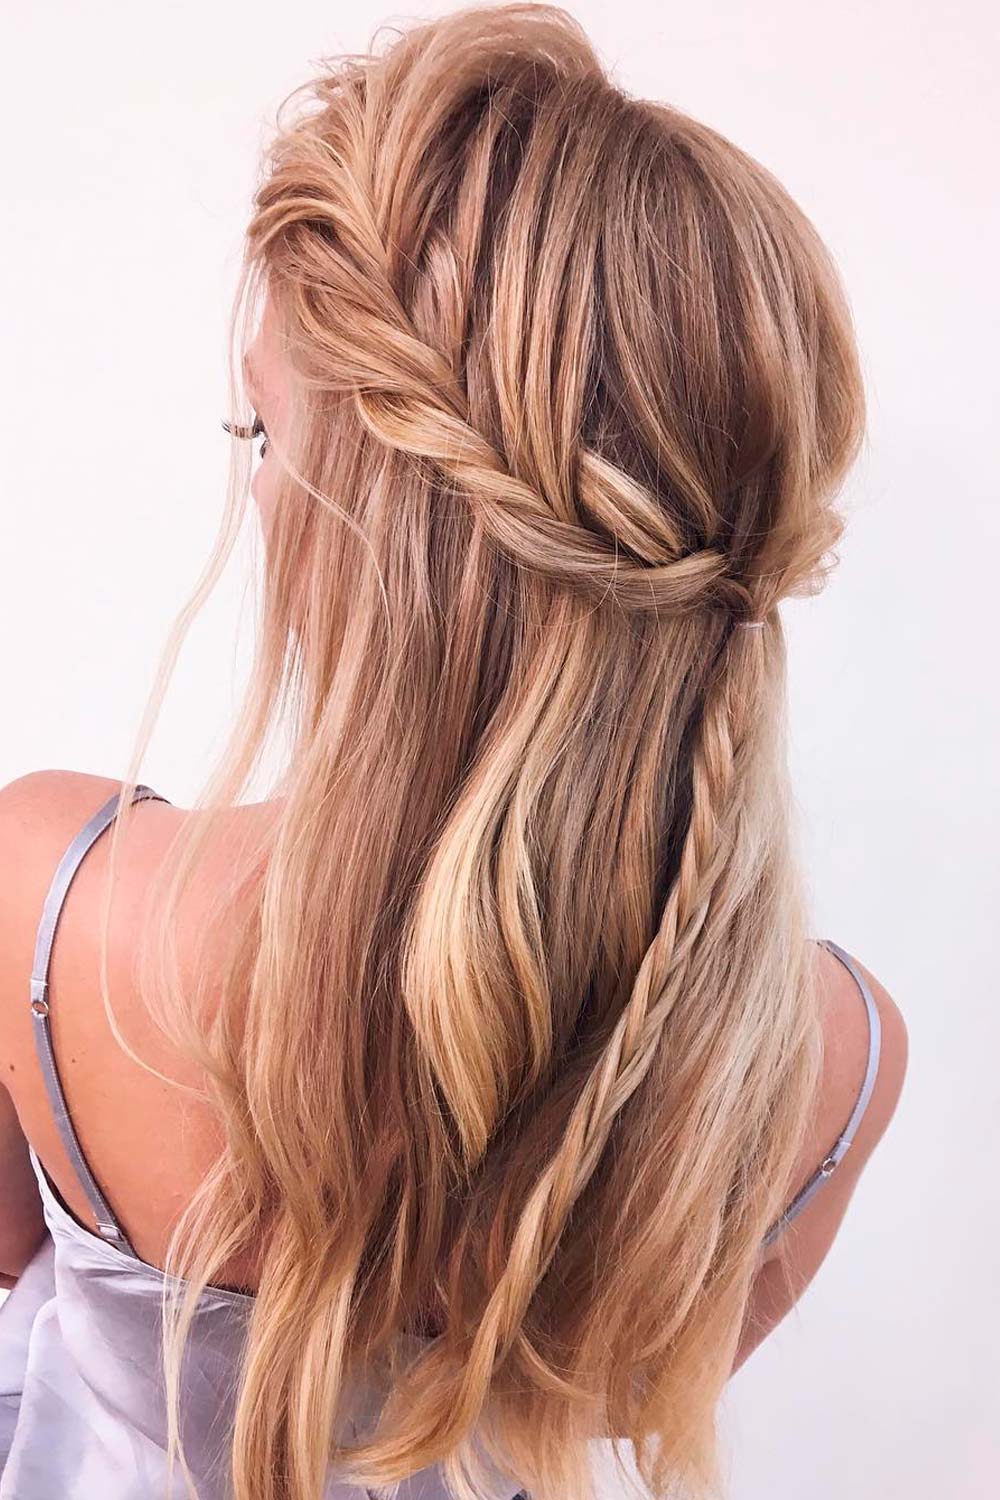 A top knot and a waterfall braid are some of the best examples of half up half down hairstyles for Christmas